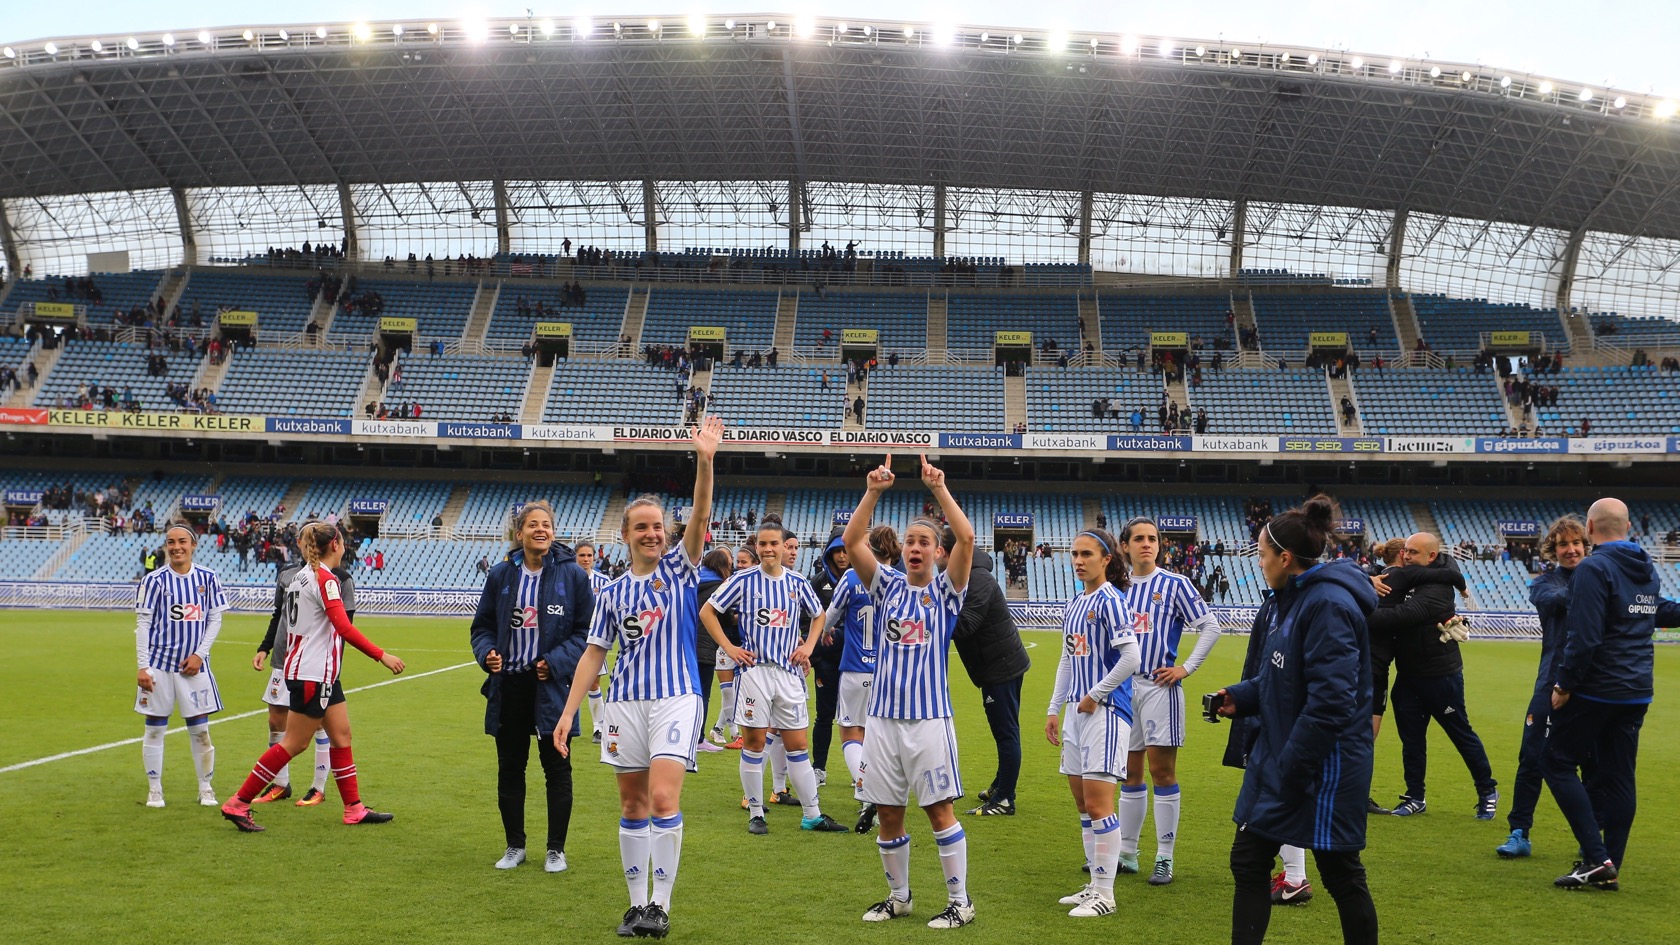 The historic first women's Real derby at Anoeta